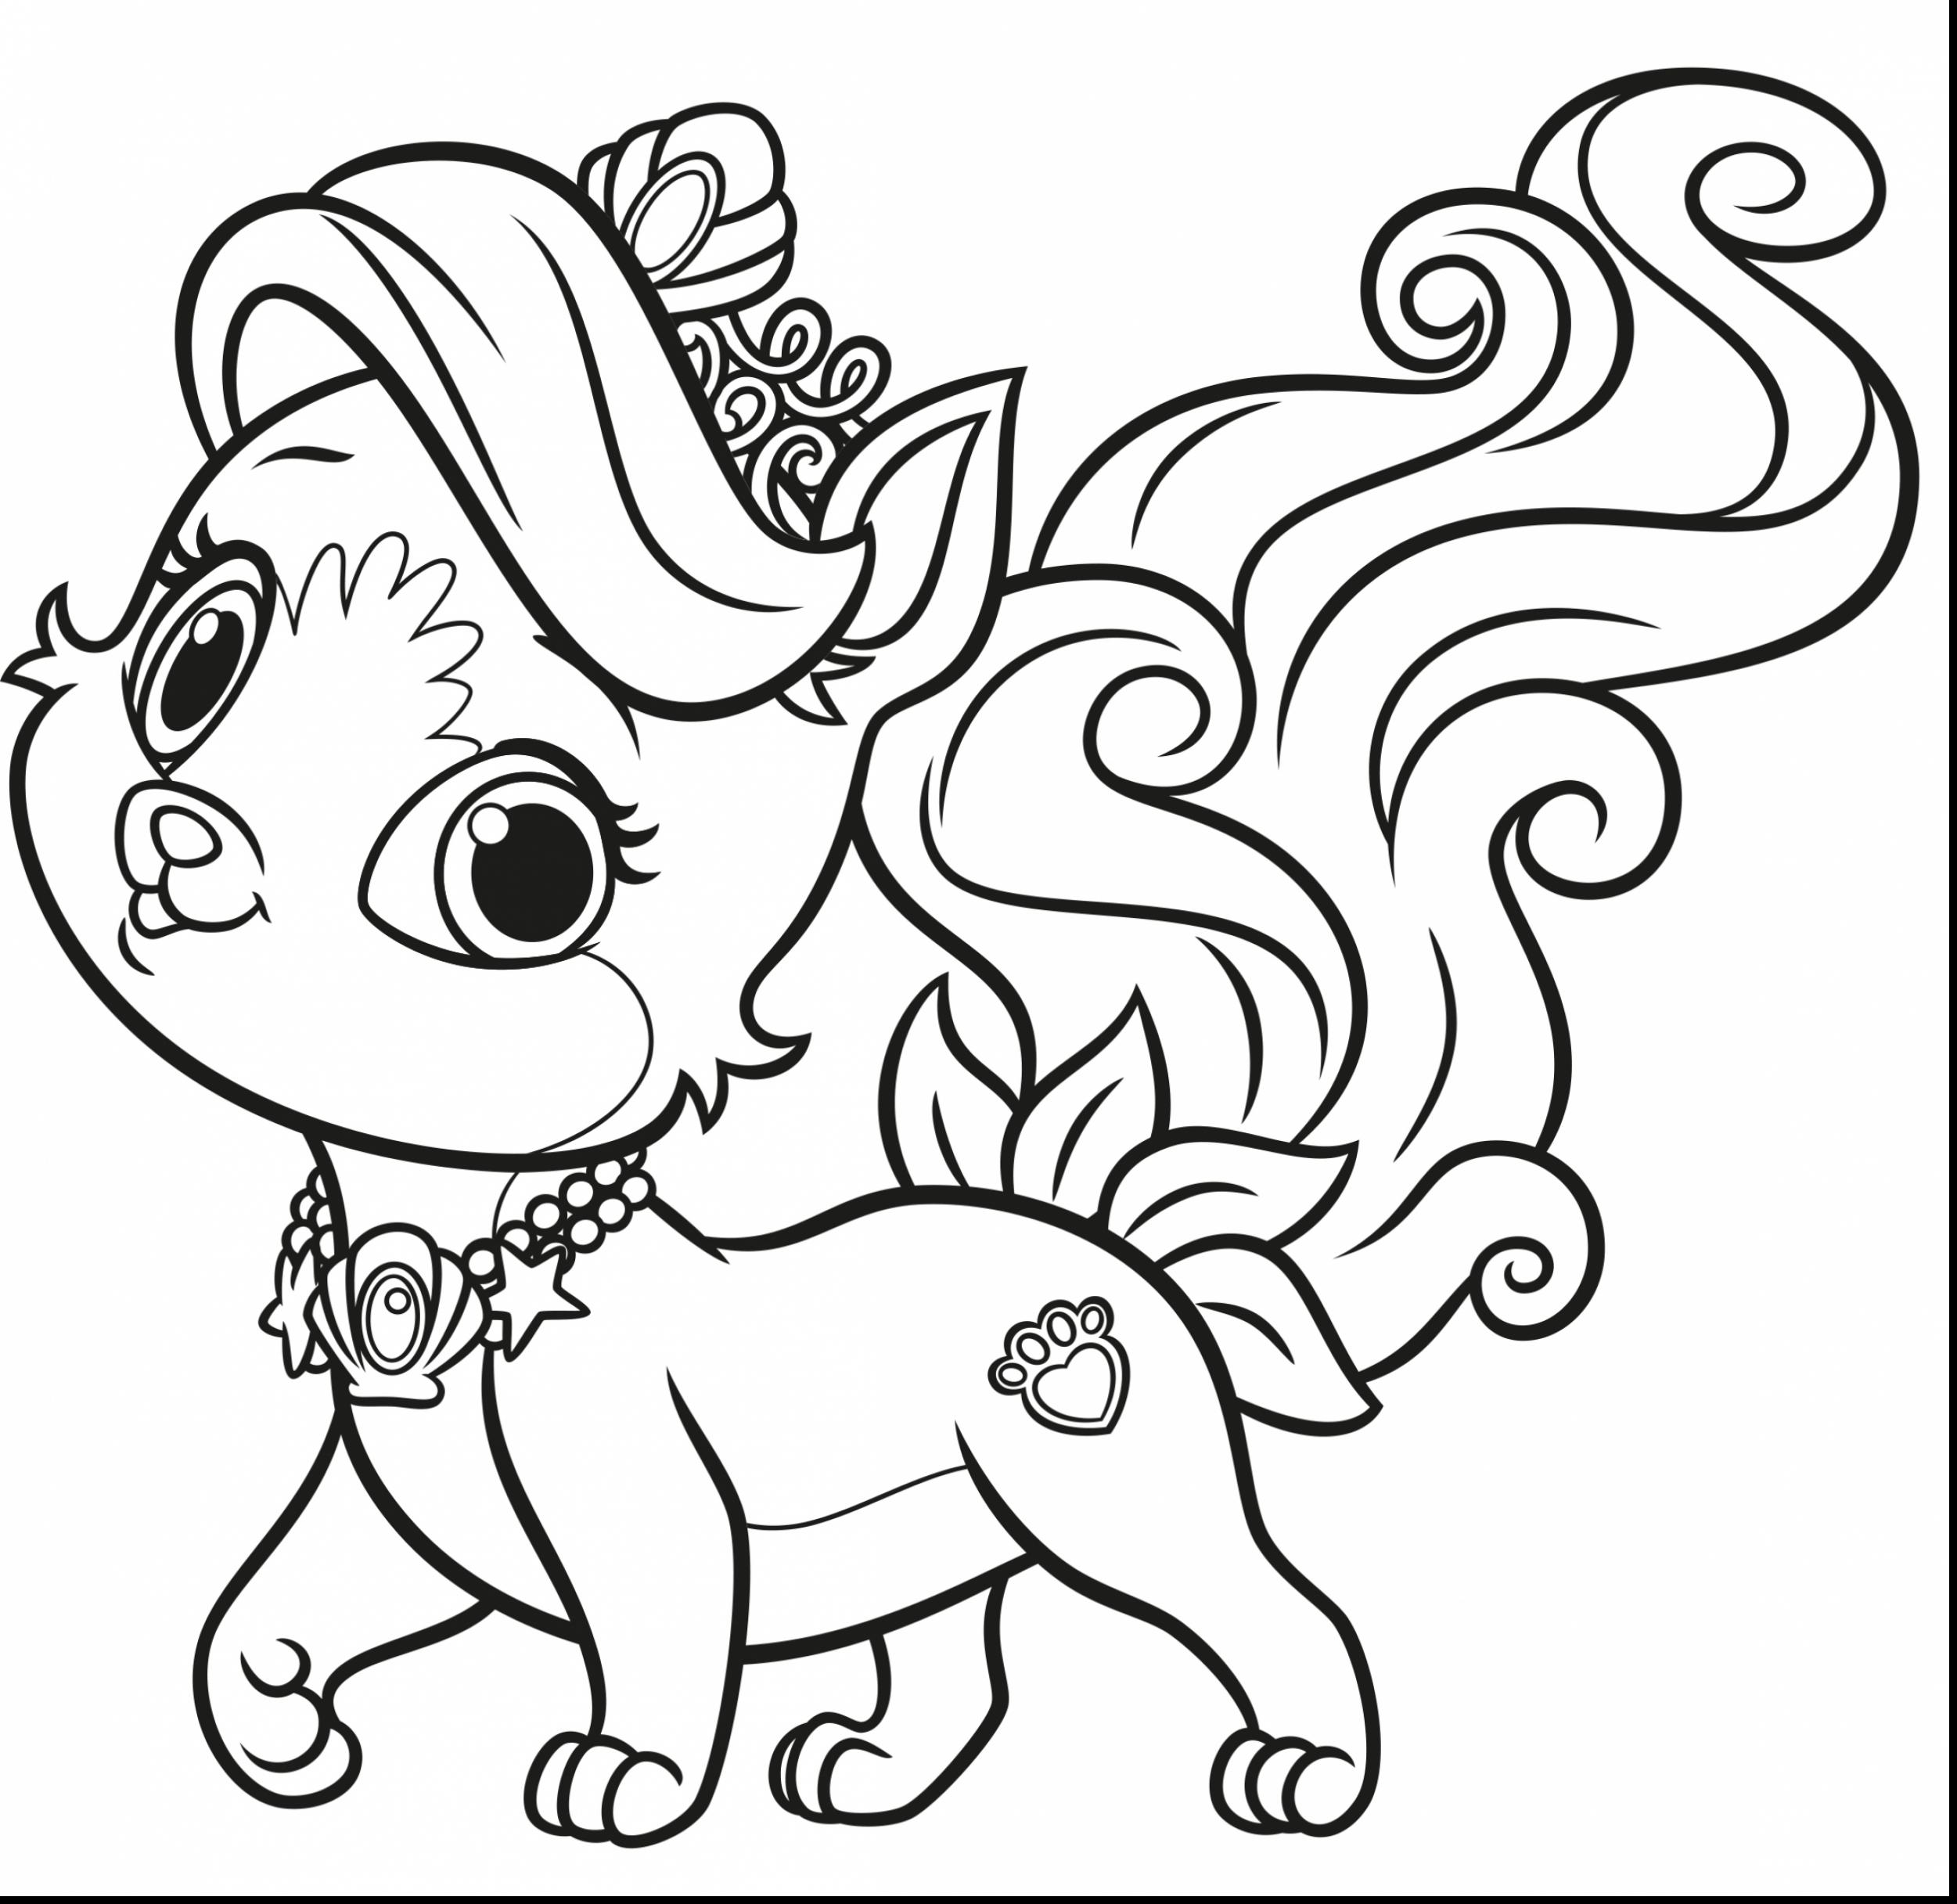 Cute Dog Coloring Pages For Kids at GetDrawings | Free download